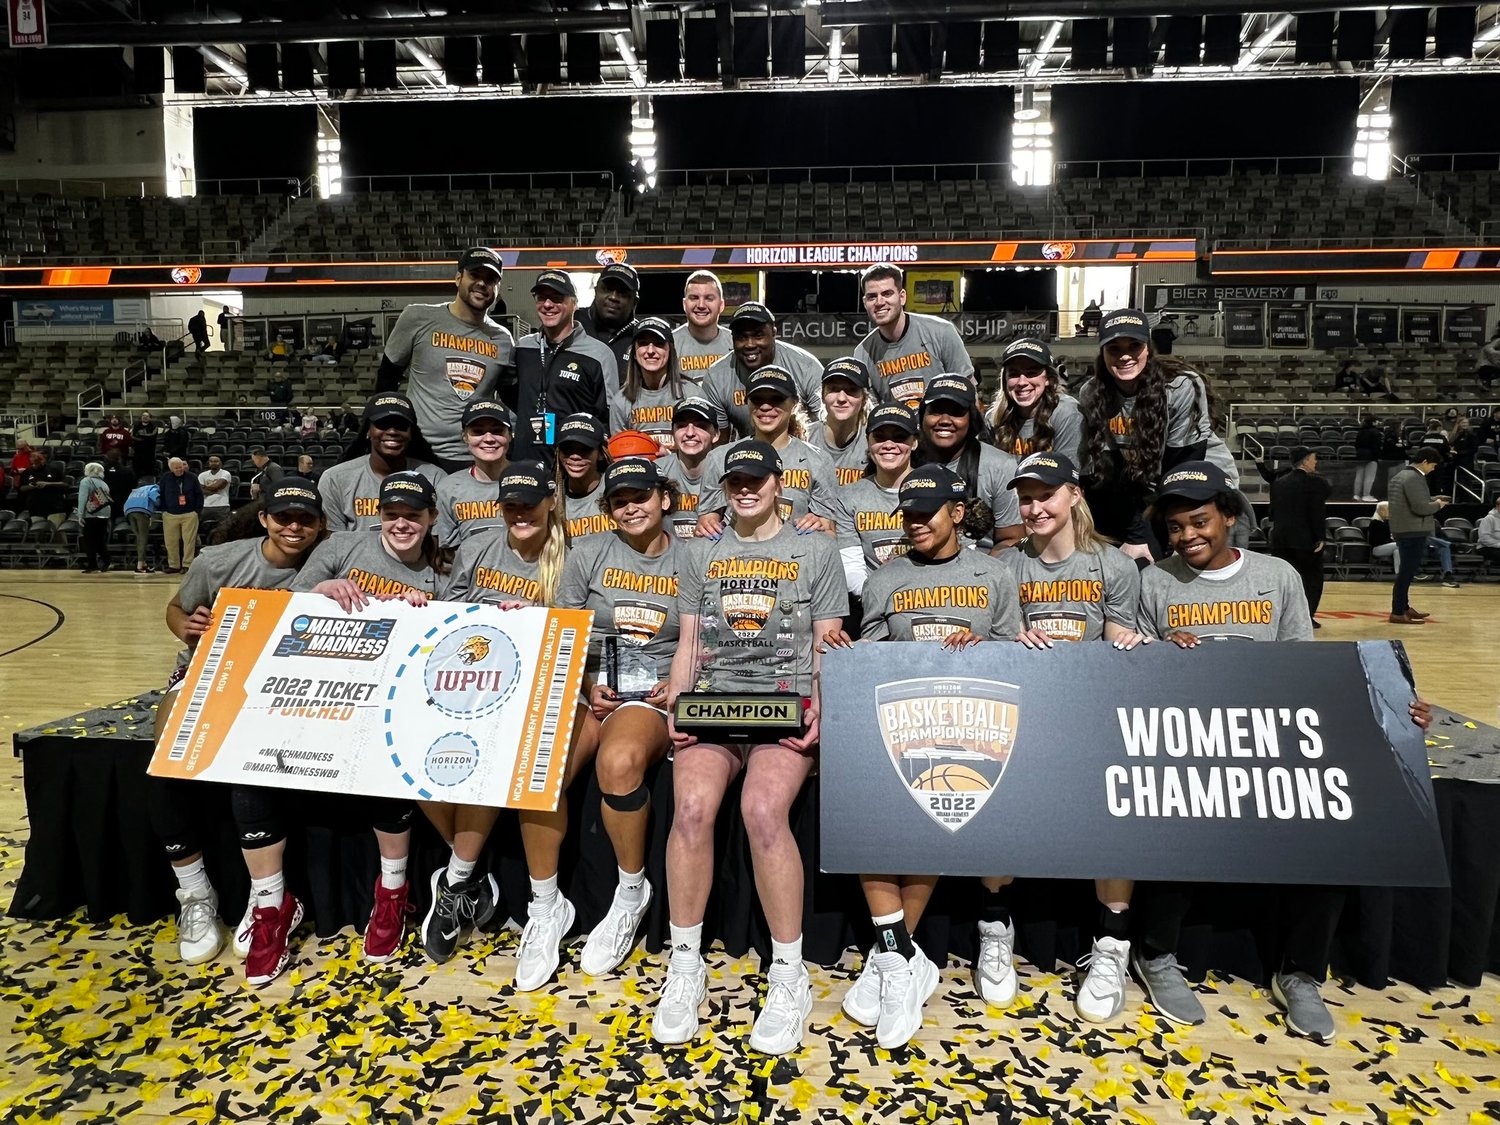 IUPUI Women’s Basketball ends their 2021-22 season at 24-5 with two of those losses coming via forfeit in the Horizon League. The Jags finally got to experience the NCAAW Tournament as the hisoric career of Fountain Central graduate Macee Williams comes to an end. Williams is a four-time Horizon League Player of the Year and is the all-time scoring and rebounding leader in IUPUI history.